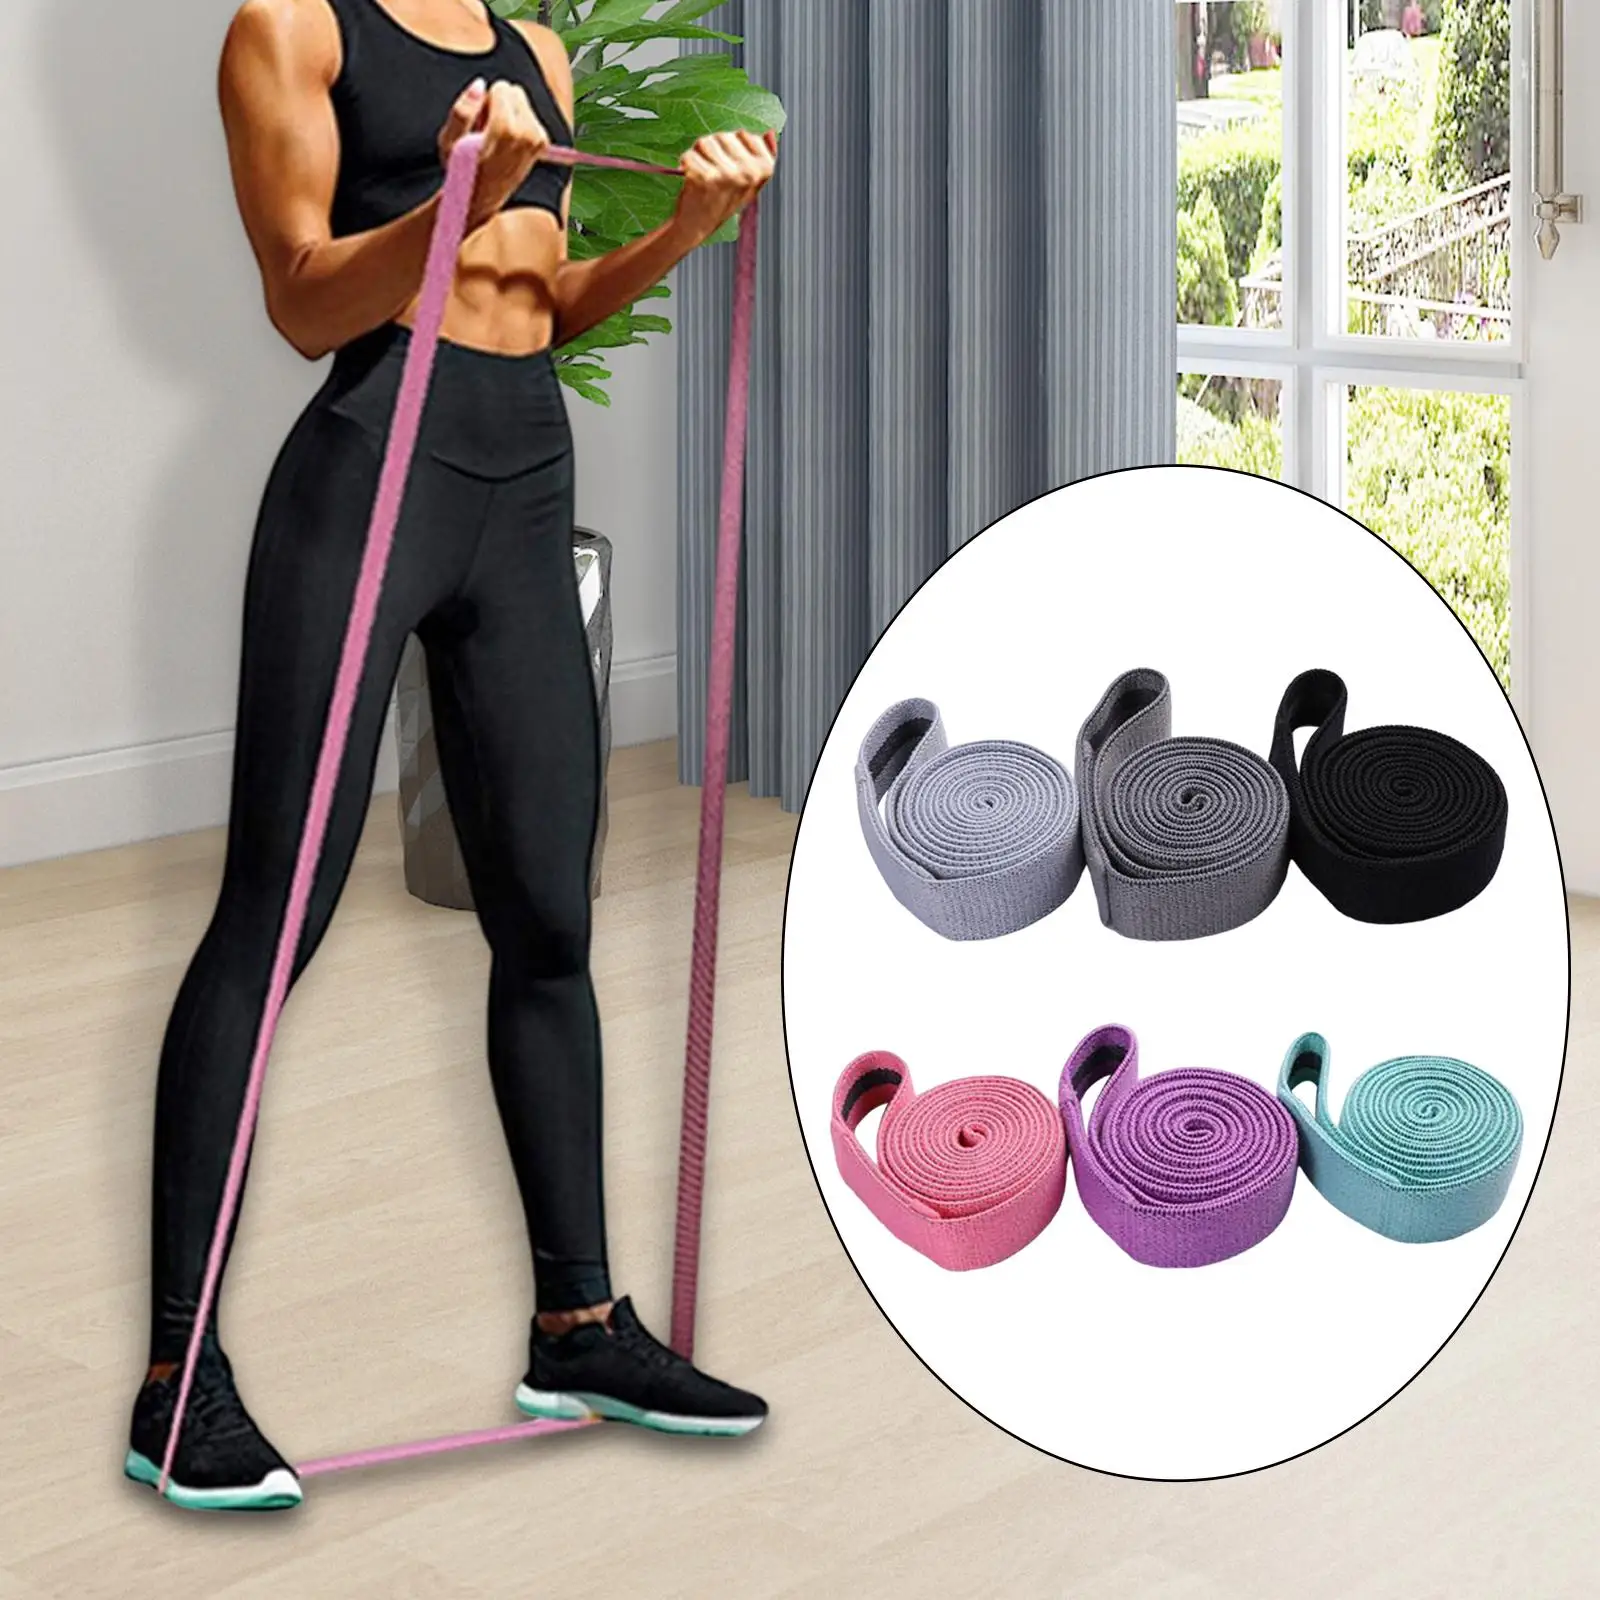 Long Resistance Bands Set Pull up Assist Bands for Strength Training Body Stretching Men Women